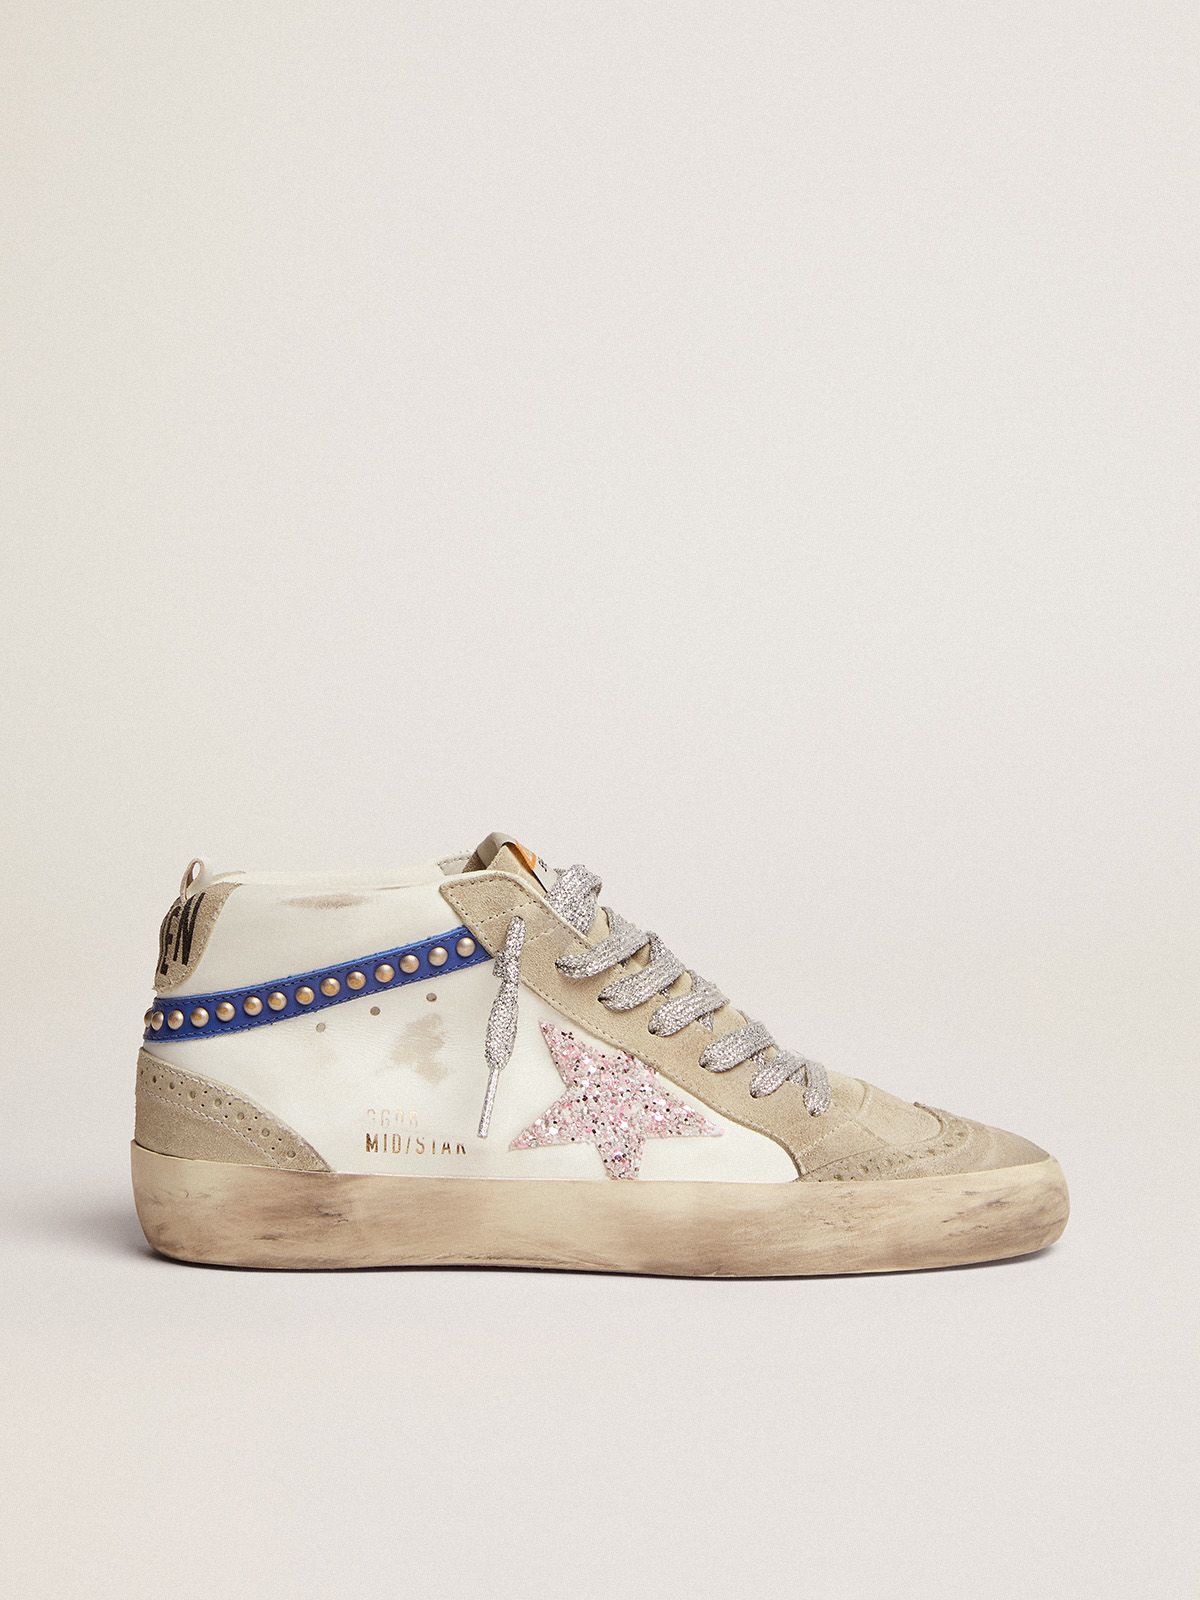 Mid Star LTD sneakers with white and pink glitter star and blue leather flash with gold-colored studs